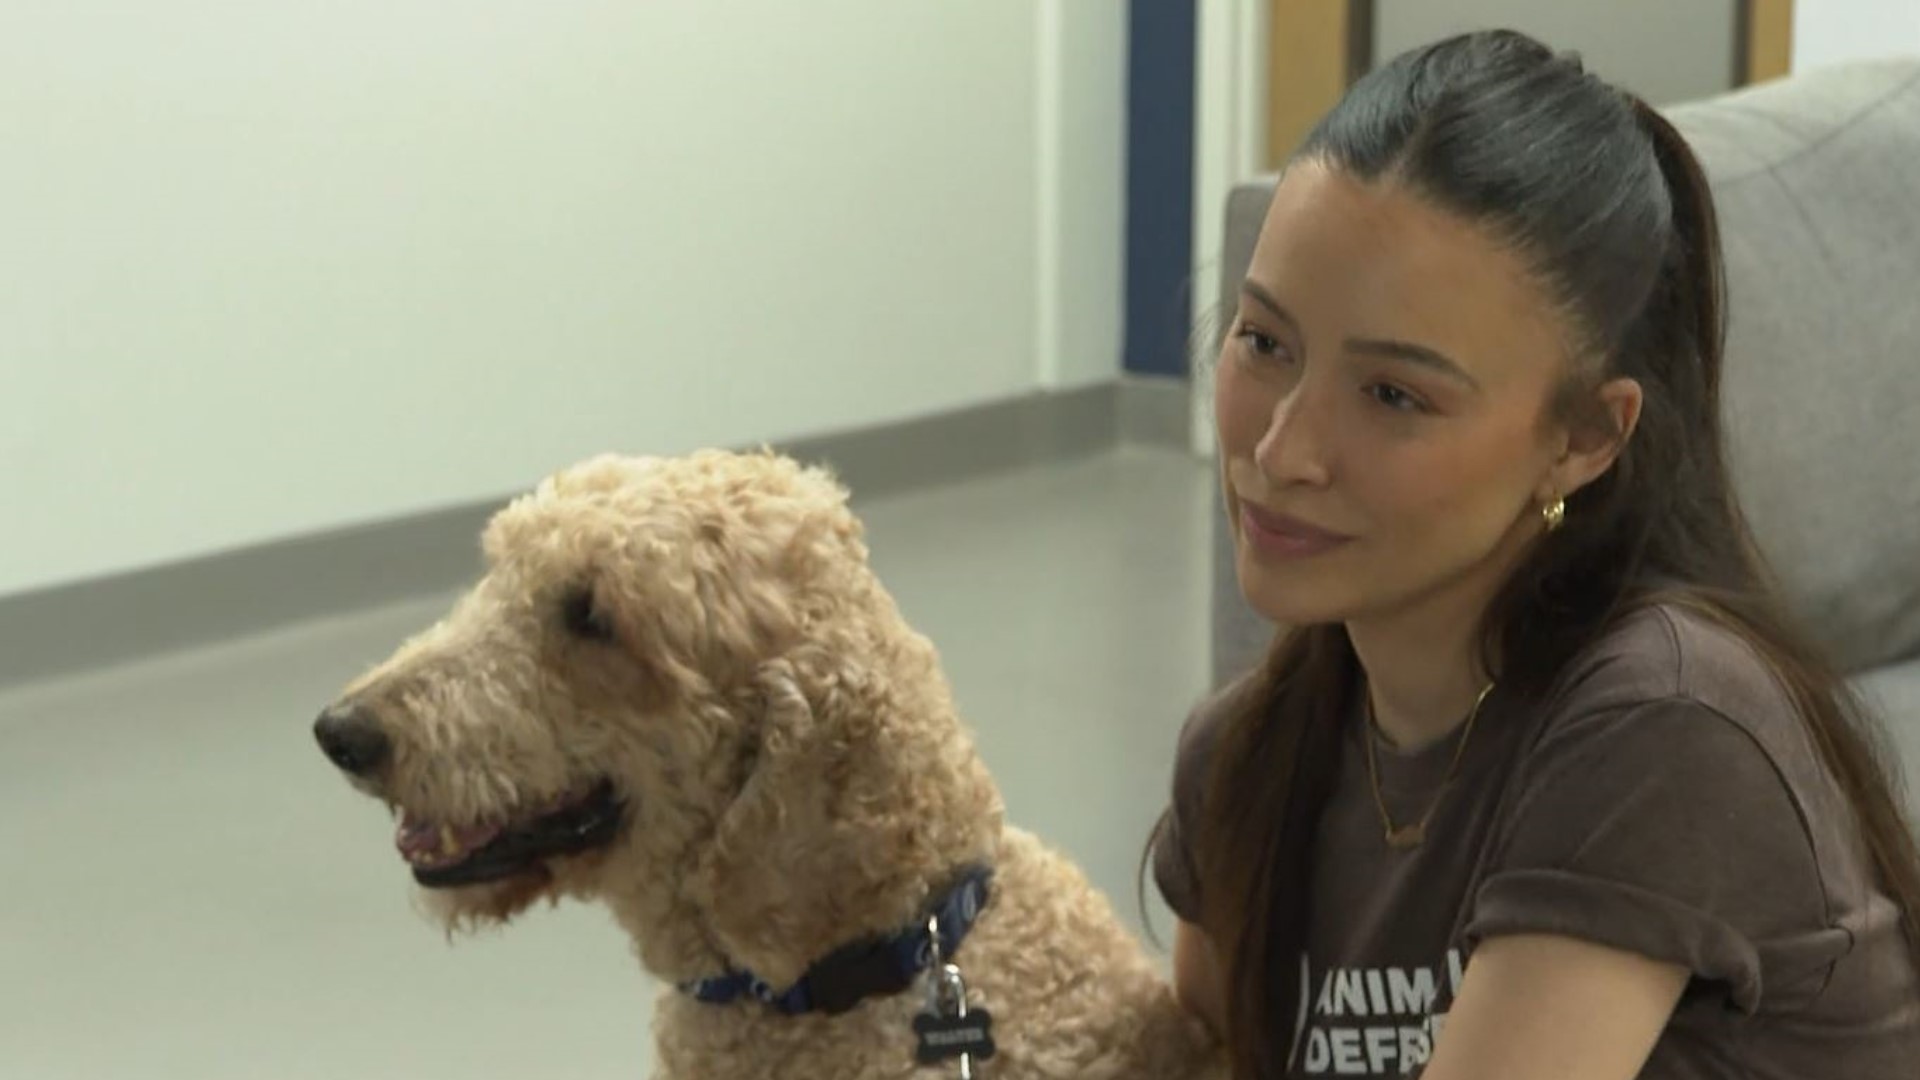 The senior dog was rescued along with more than 50 dogs, at least two cats, several chickens and horses, Fulton County rescuers explained to Christian Serratos.